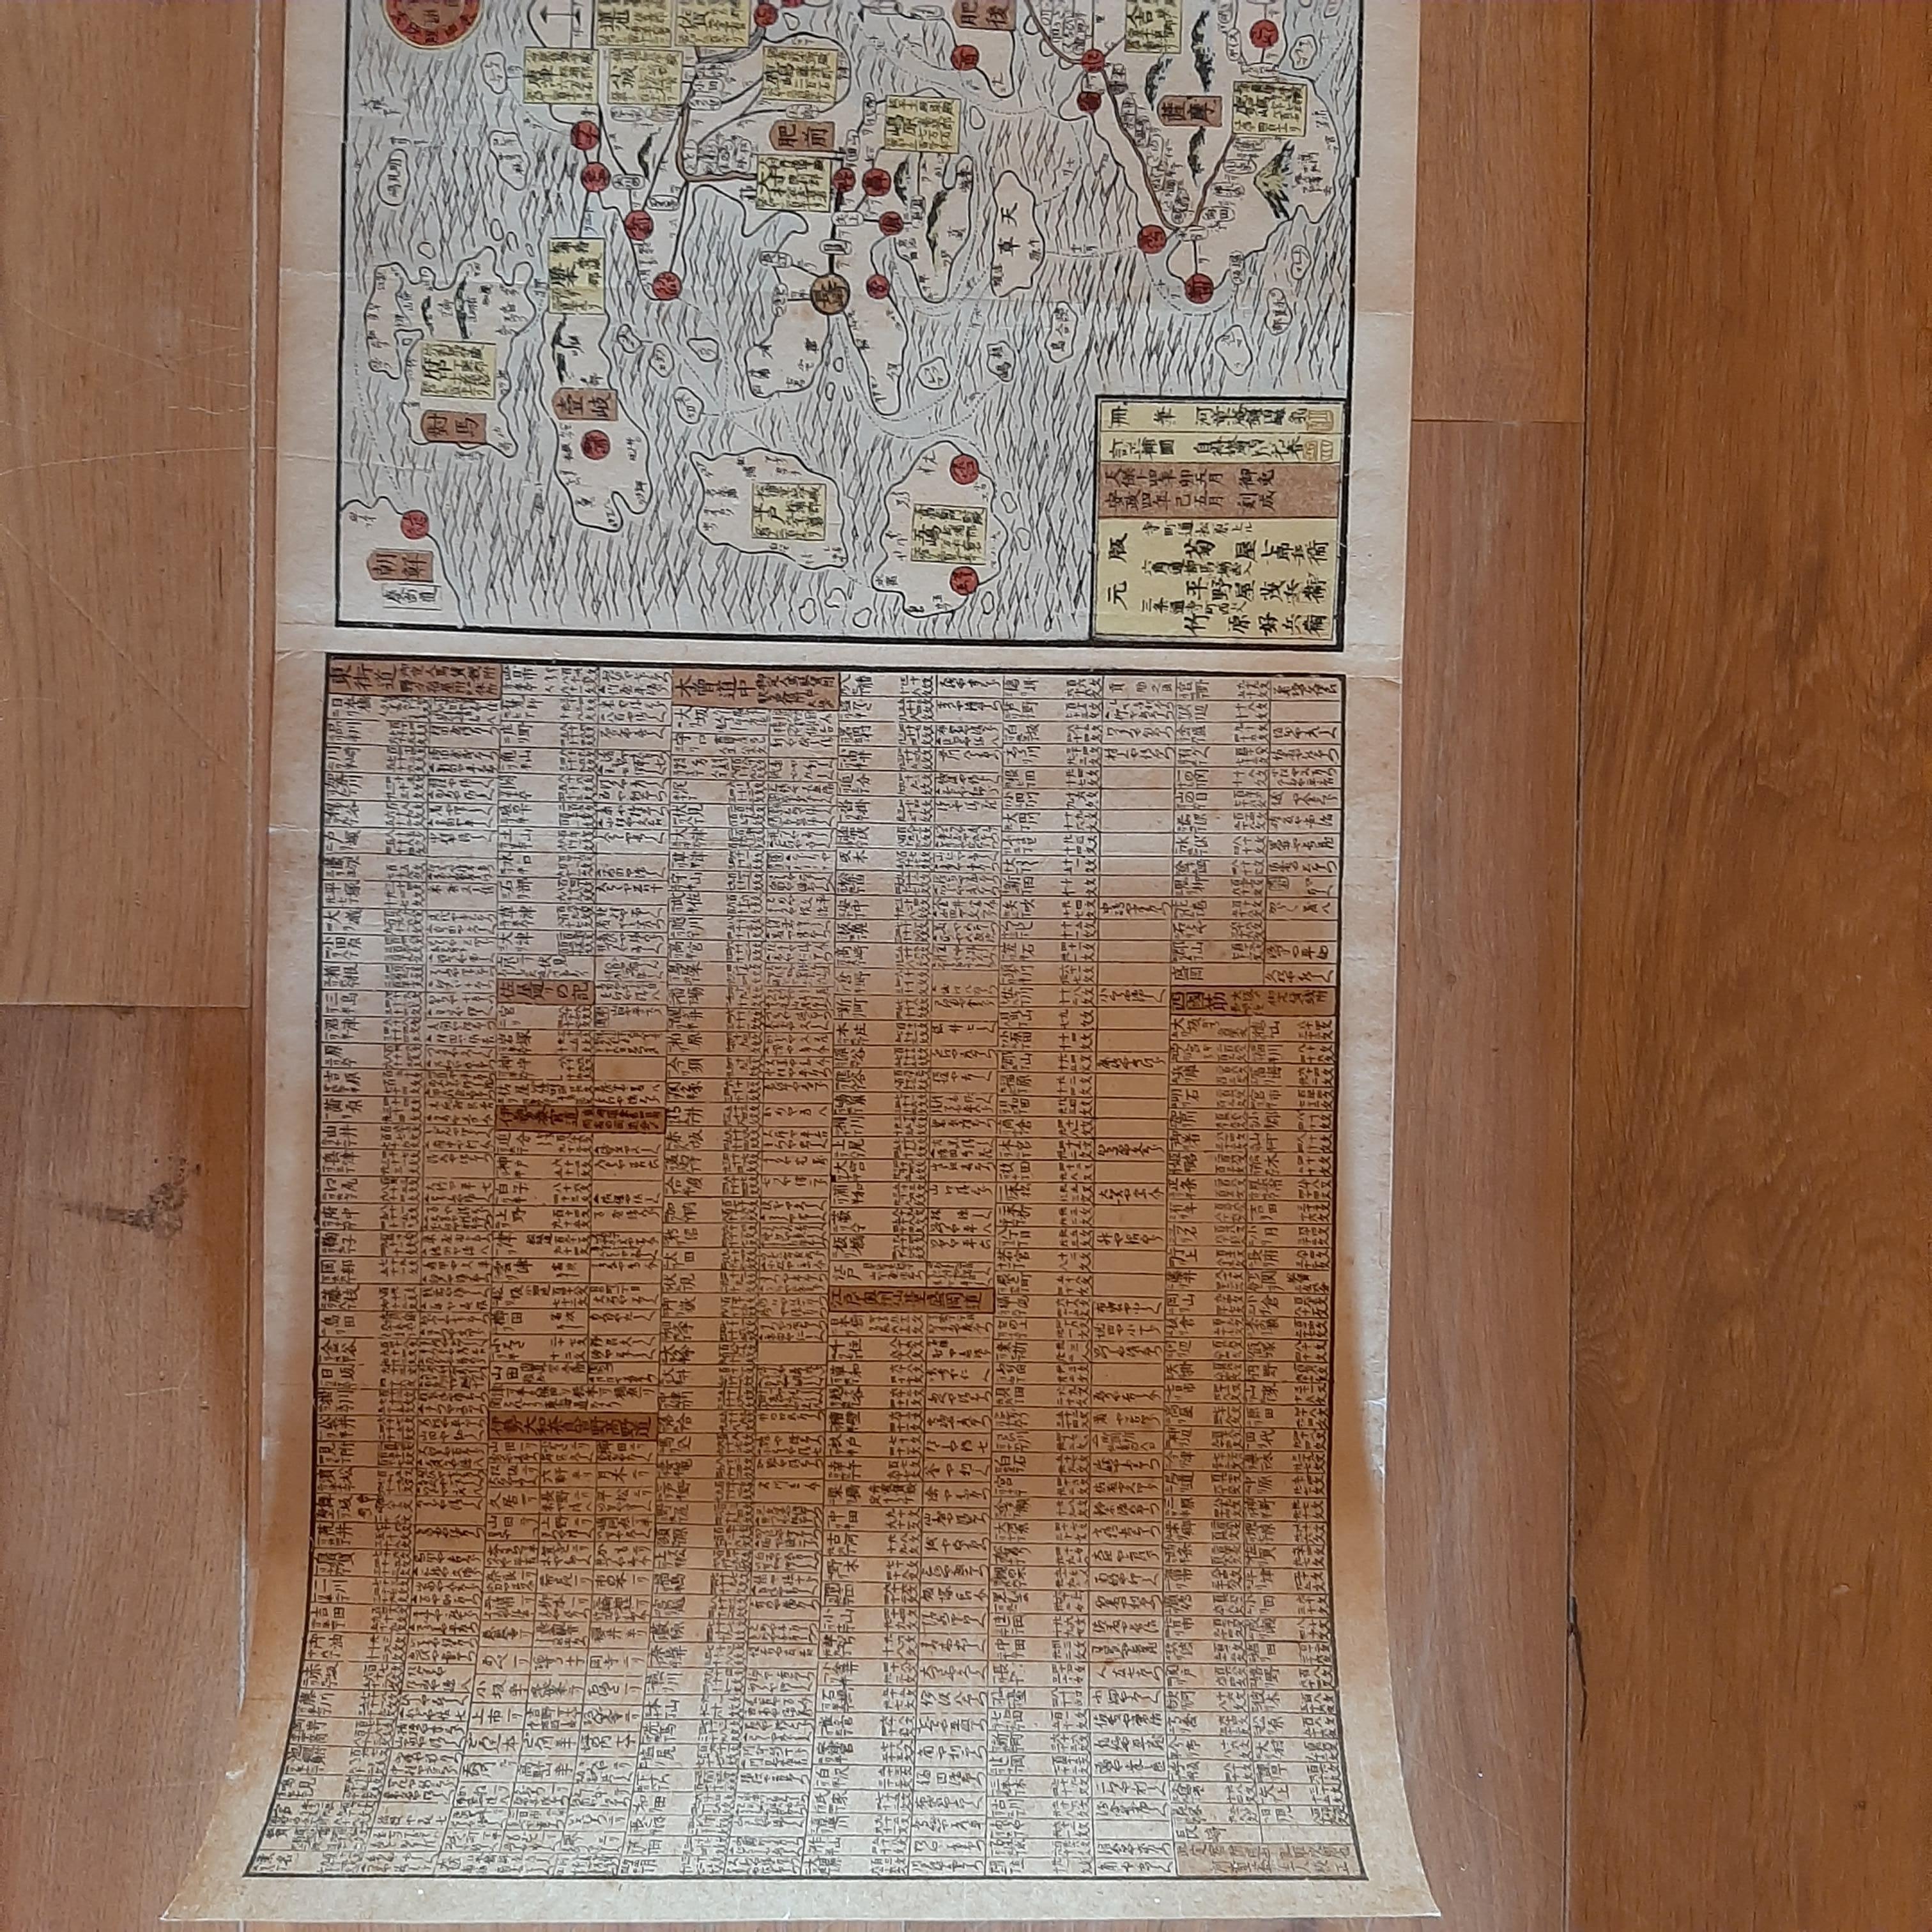 Original Japanese woodblock print map of Japan. Very large and fascinating map, rebacking with Japanese paper. Published circa 1860.